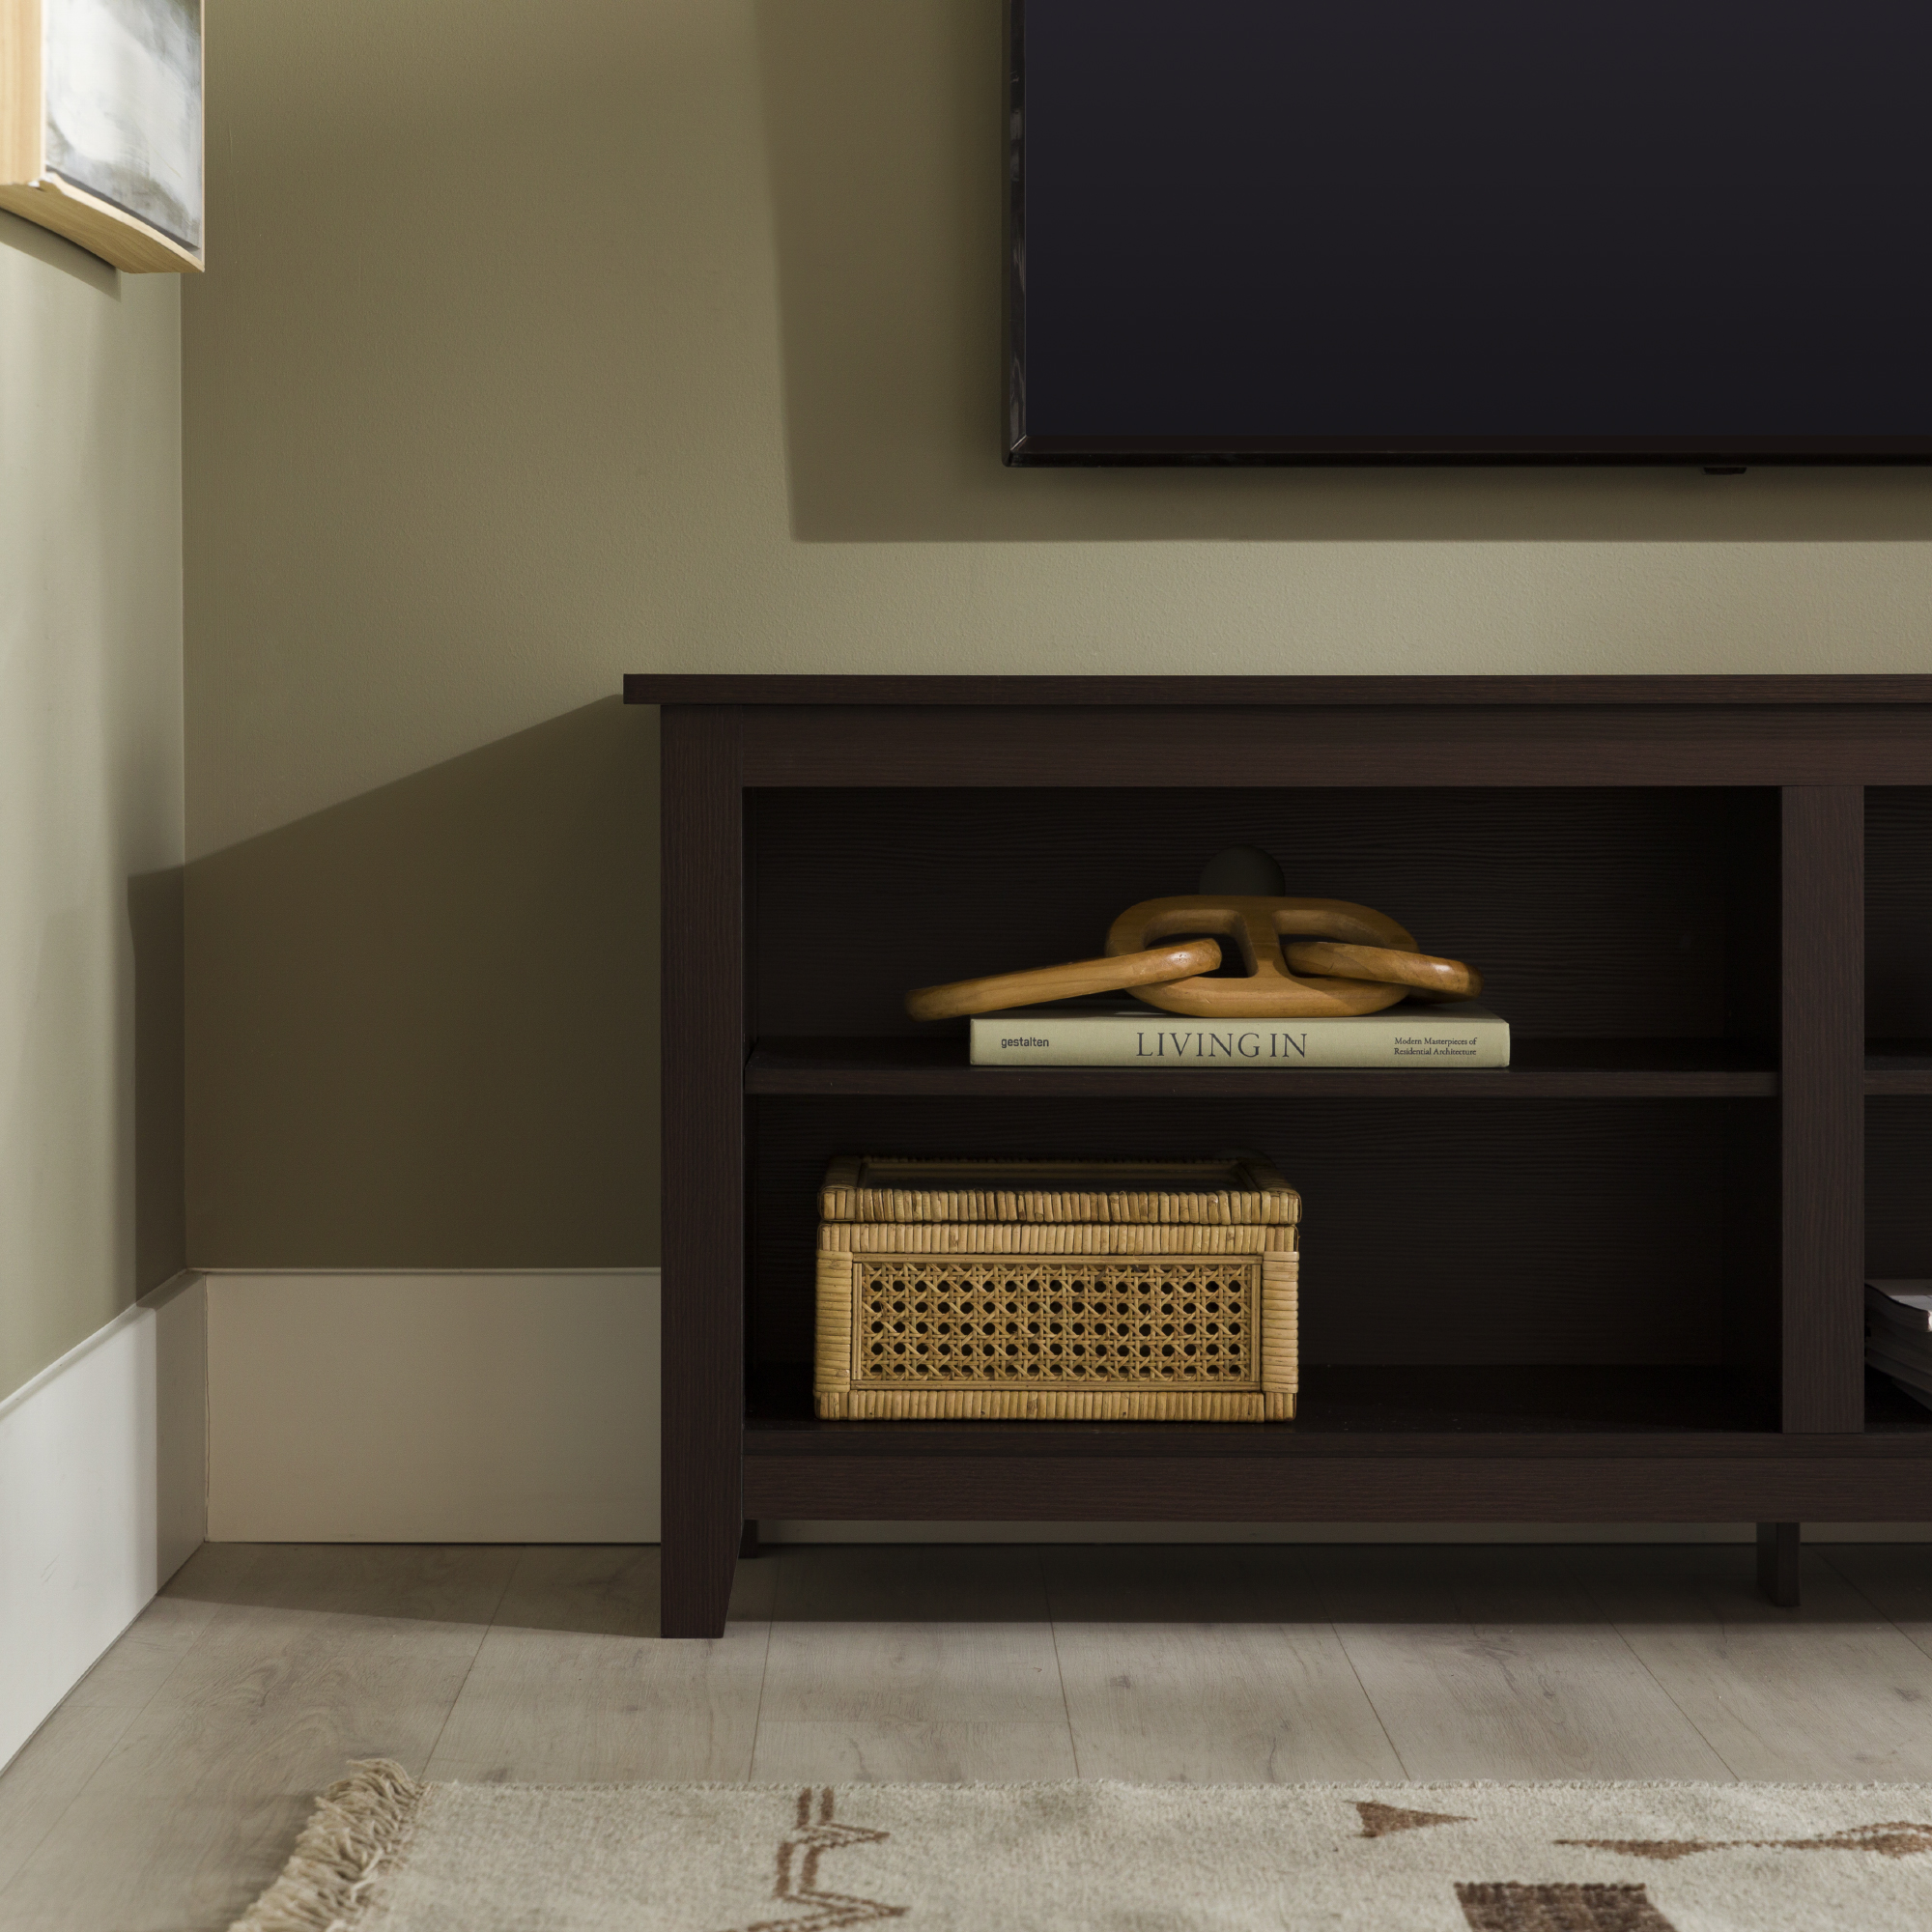 Walker Edison Contemporary Wood TV Media Storage Stand for TVs up to 60" - Espresso - image 5 of 7